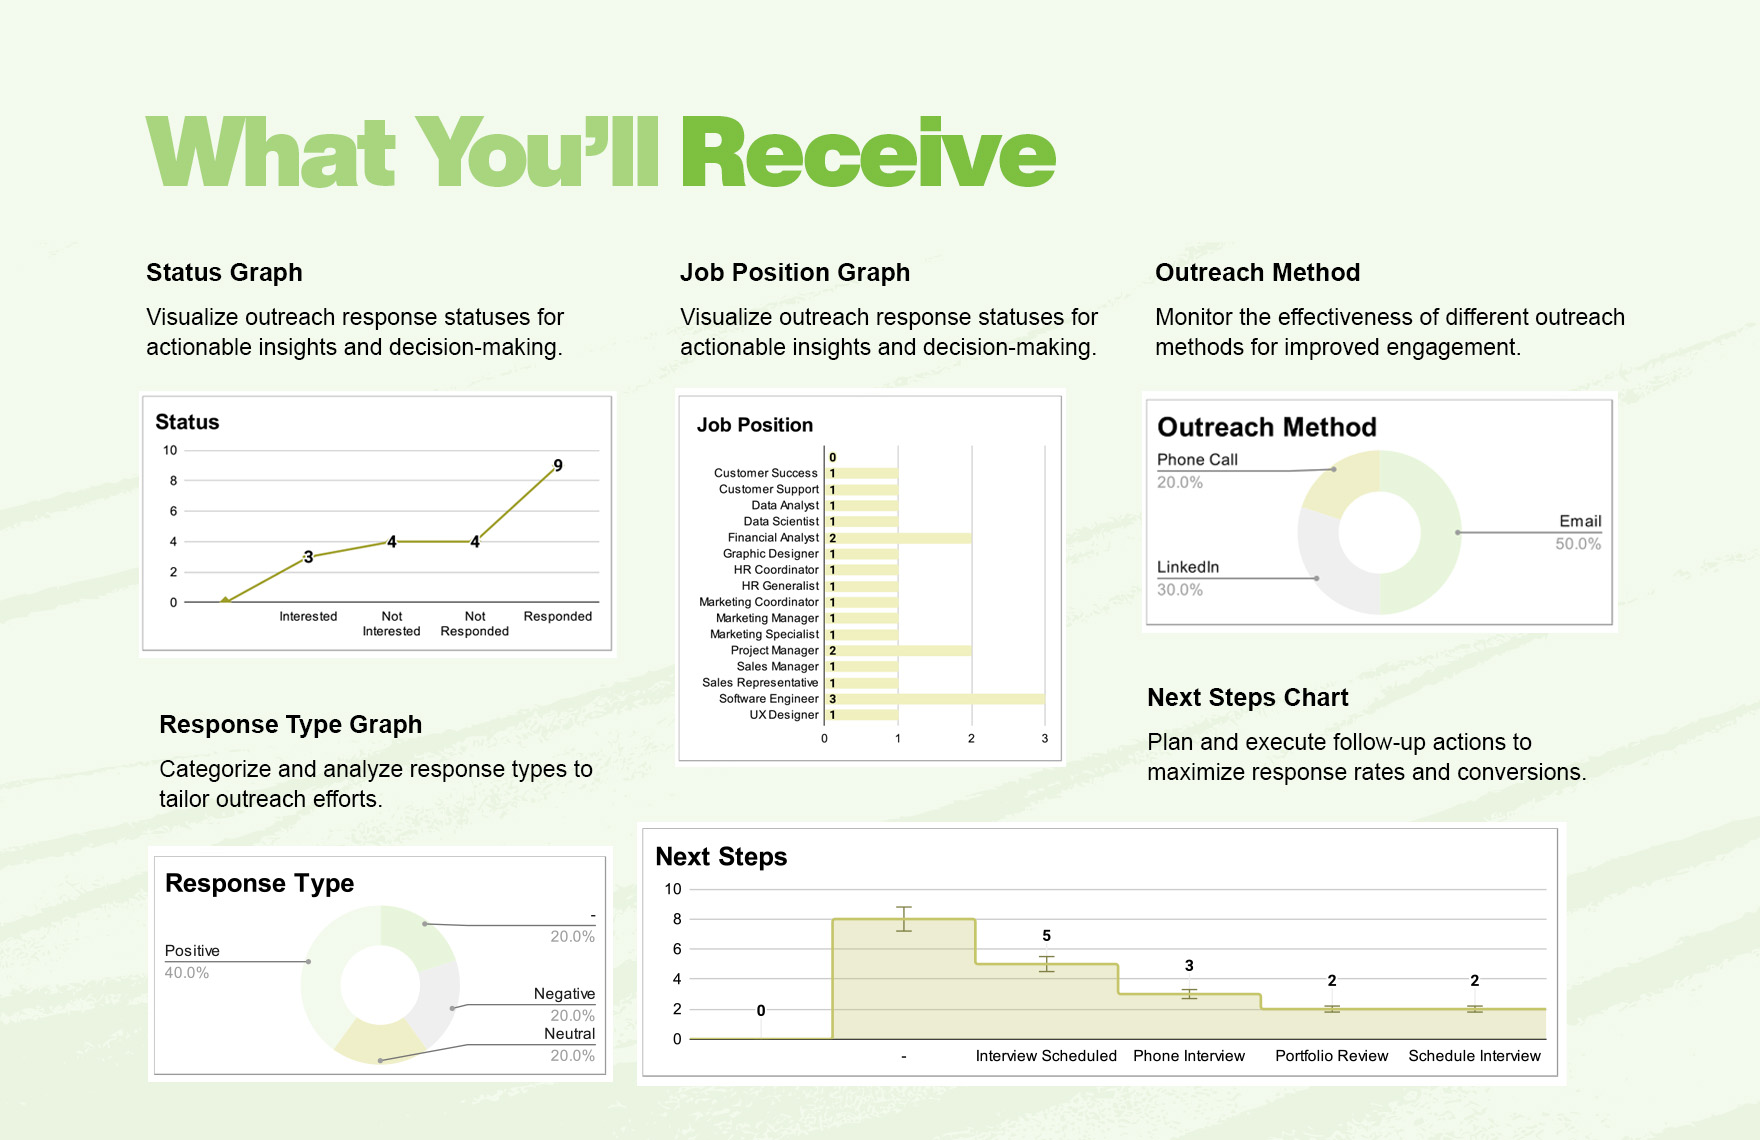 Outreach Response Rate Tracker HR Template